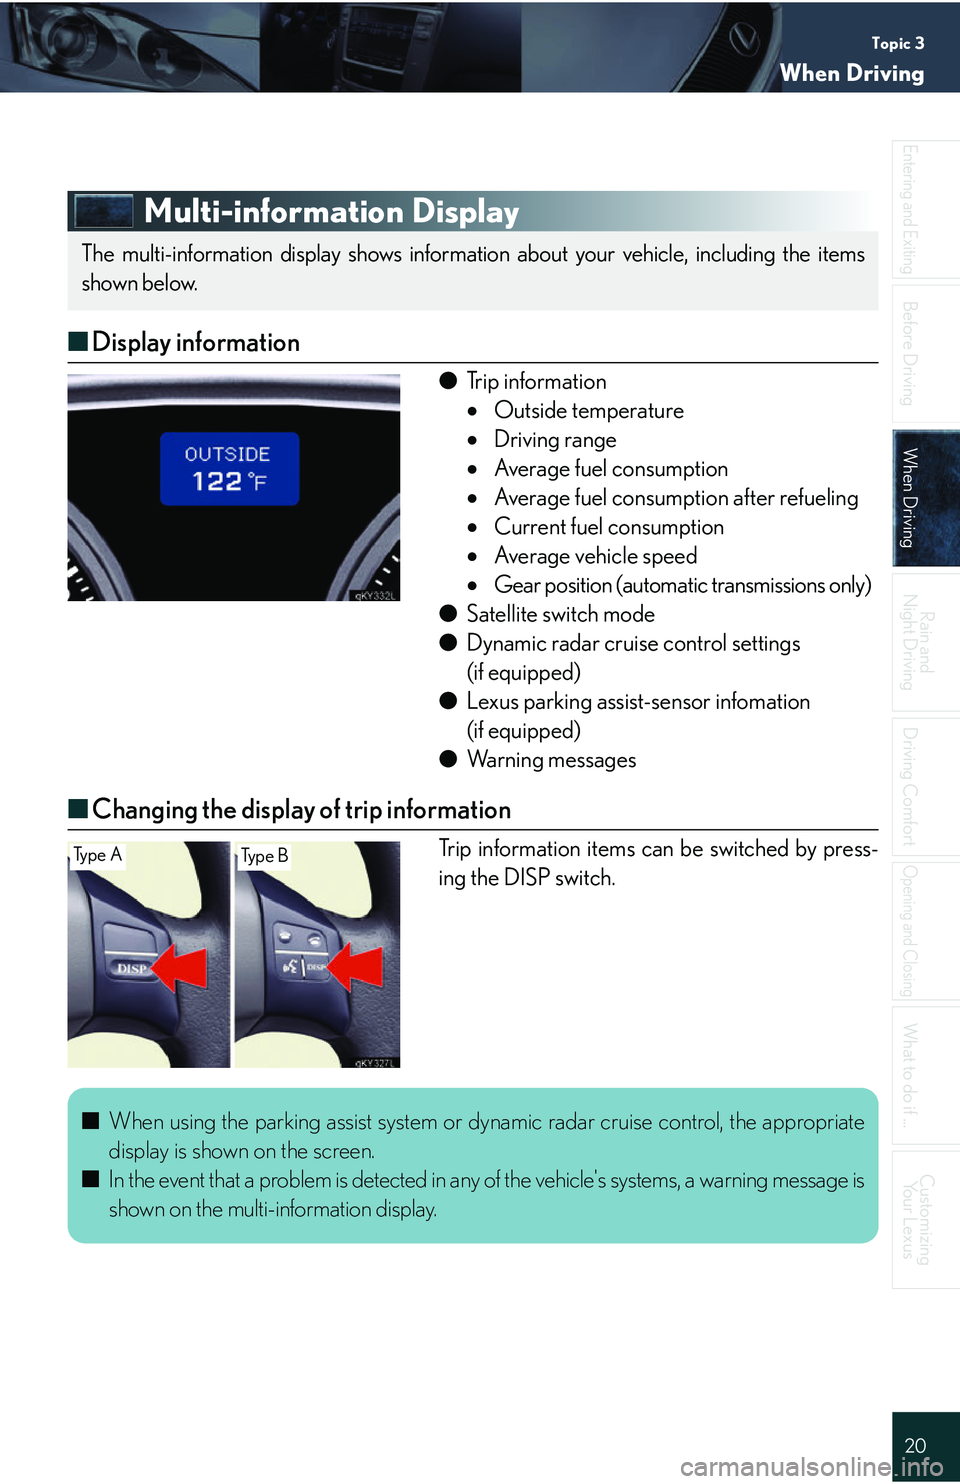 Lexus IS250 2006  Lexus Parking Assist-sensor / LEXUS 2006 IS350/250 QUICK REFERENCE GUIDE Topic 3
When Driving
20
Entering and Exiting
Before DrivingBefore Driving
When DrivingWhen Driving
Rain and 
Night Driving
Driving Comfort
Opening and Closing
What to do if ...
Customizing Yo u r  L e